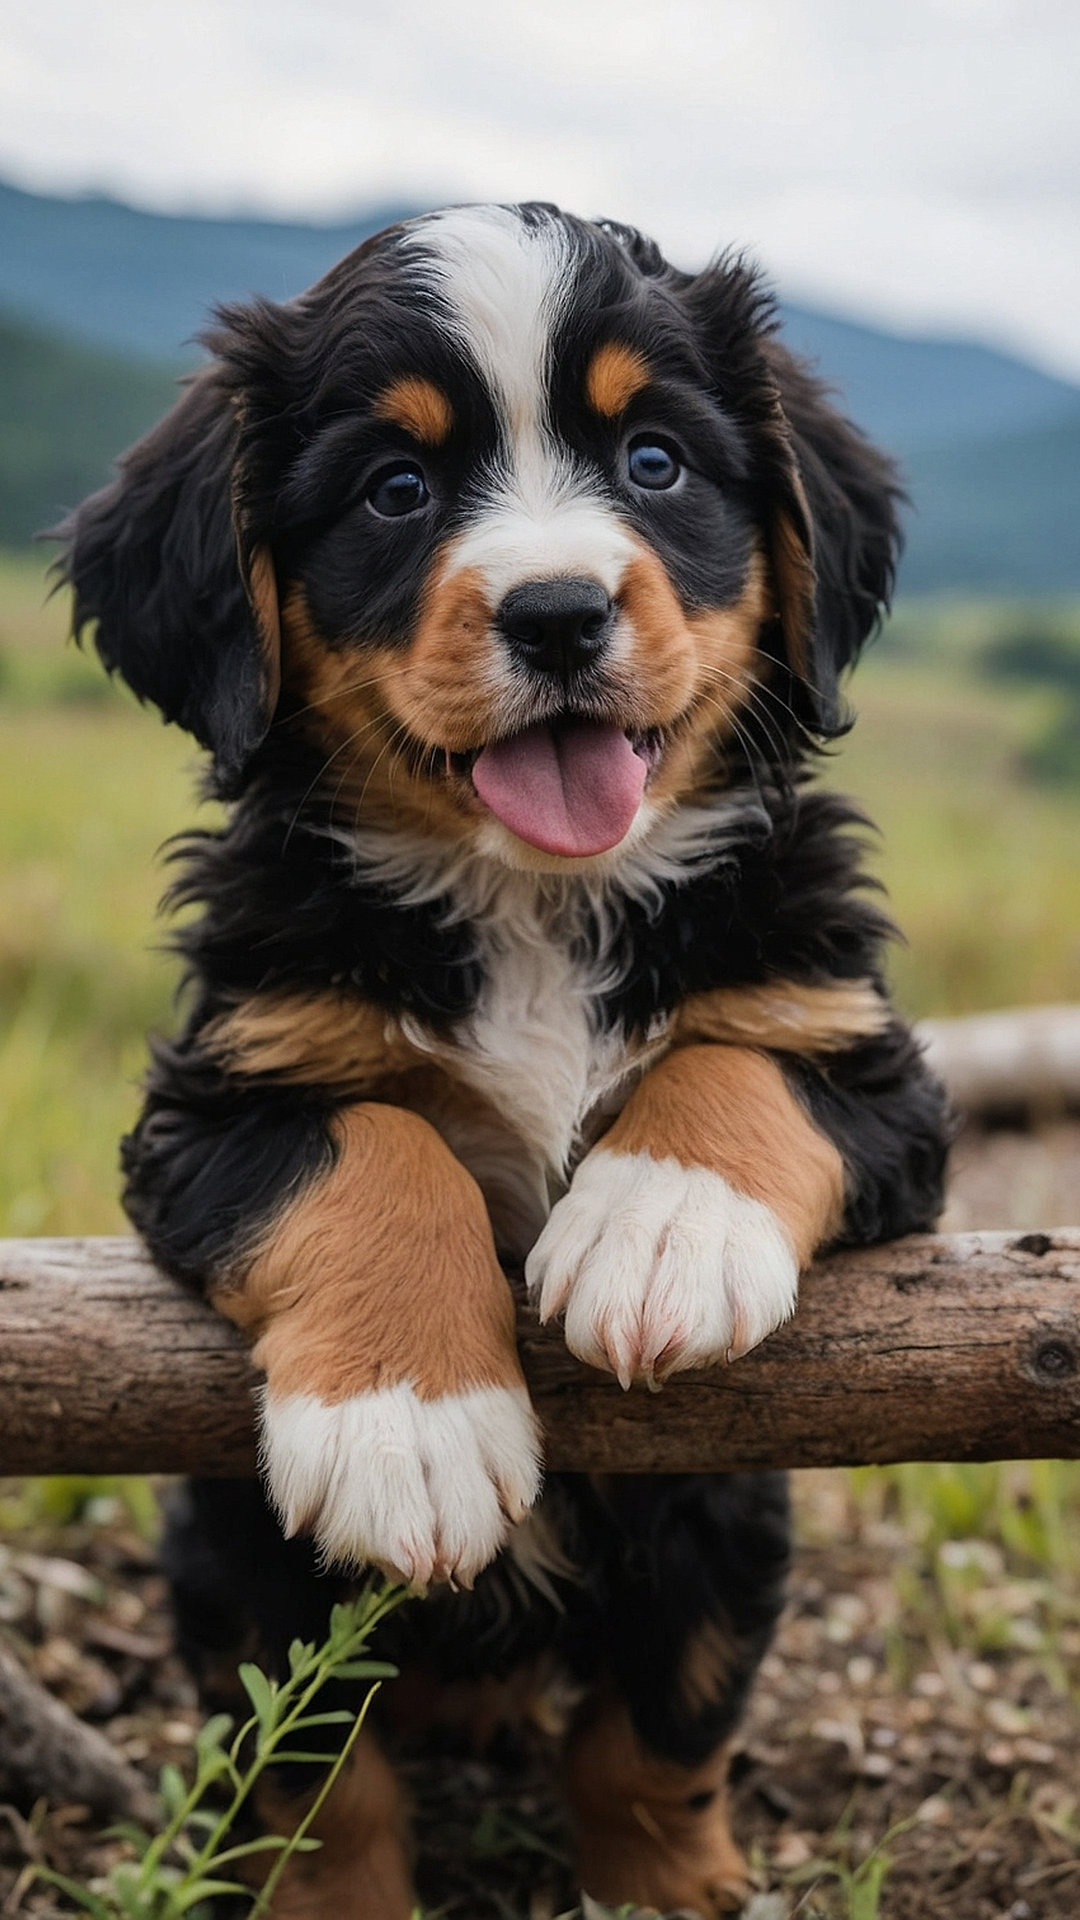 Puppy Perfection: 15 Heartwarming Images